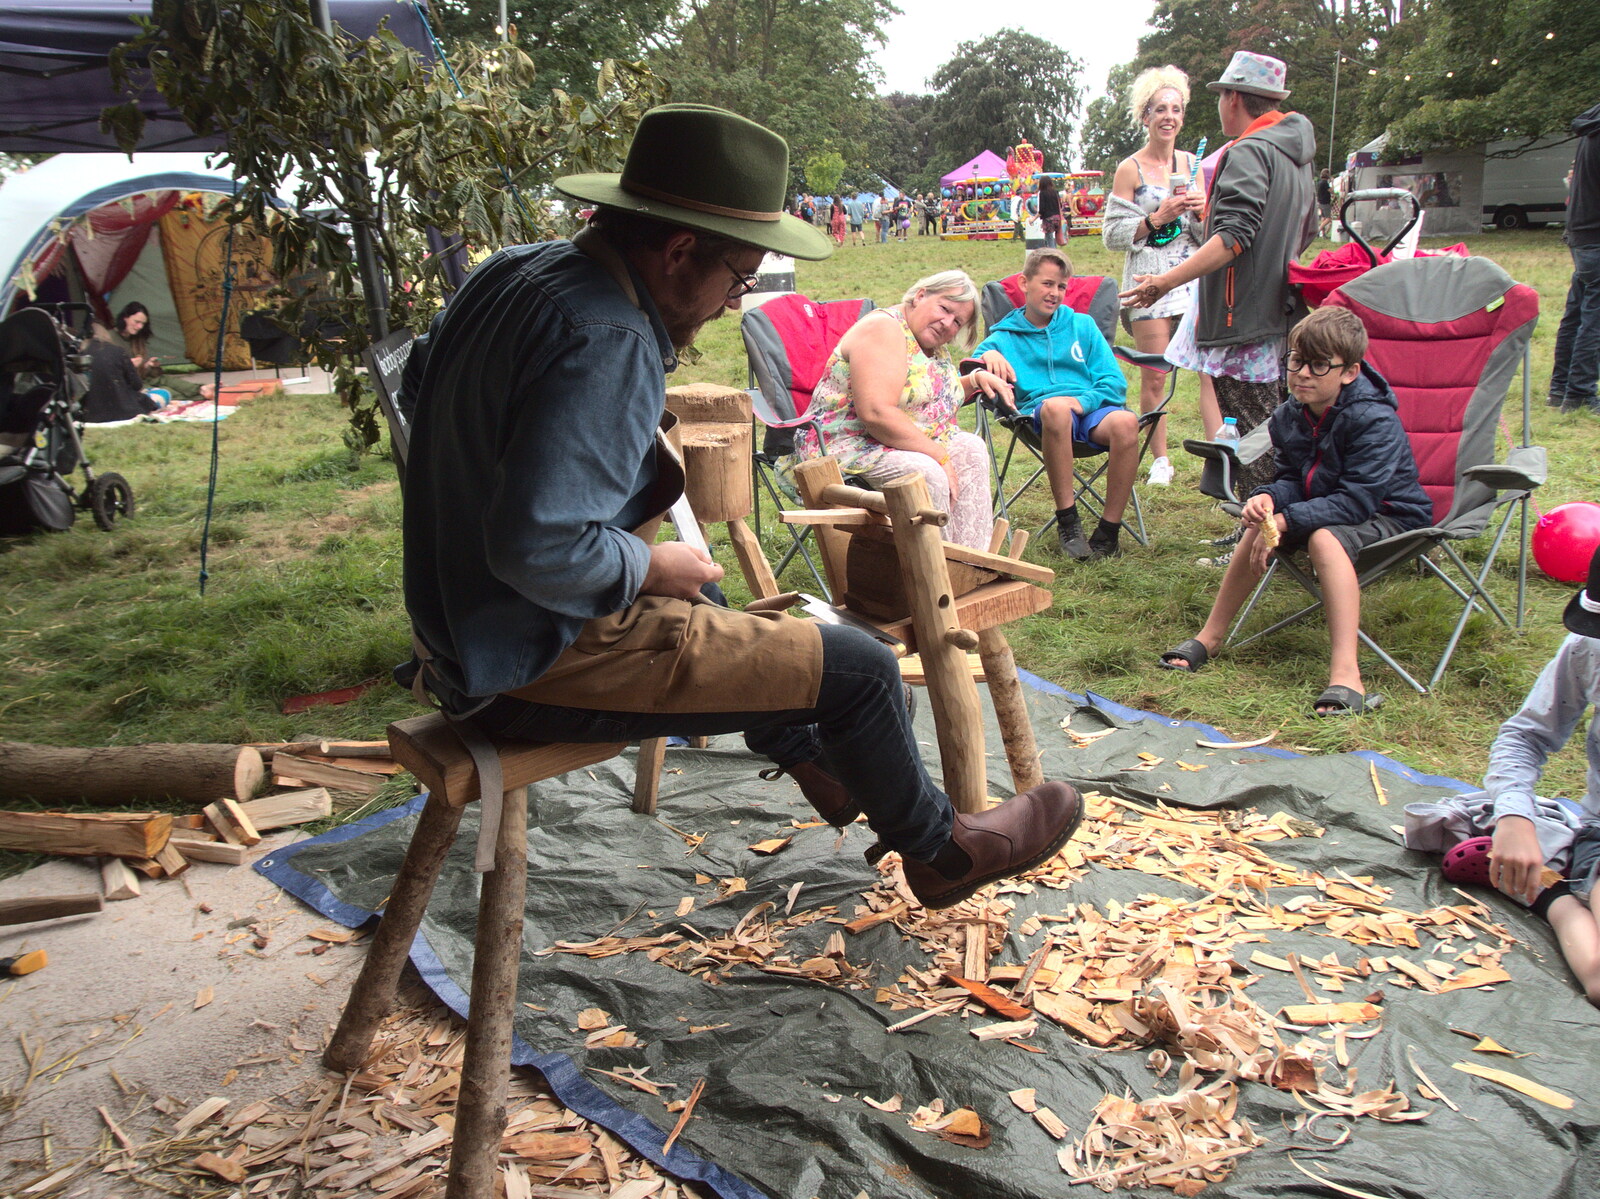 Nosher and Fred sign up to do spoon carving from Maui Waui Festival, Hill Farm, Gressenhall, Norfolk - 28th August 2021